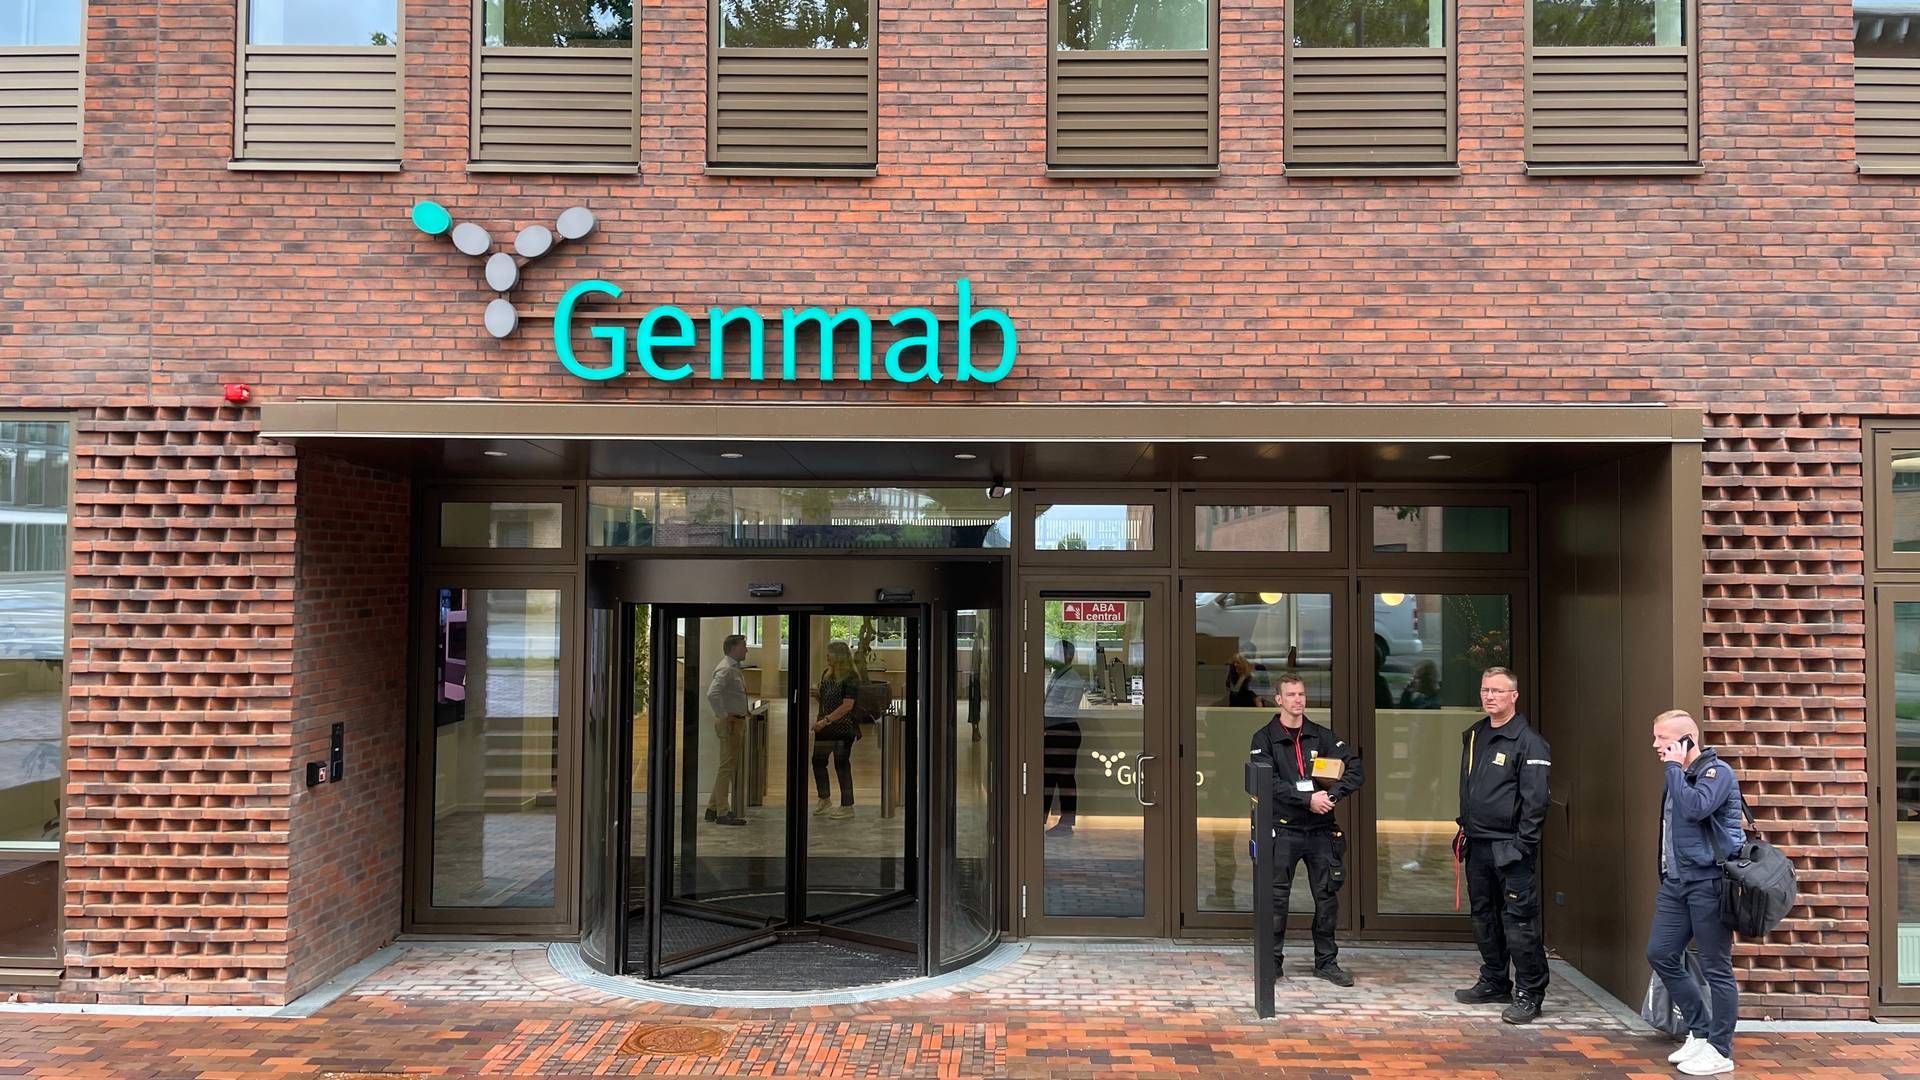 Genmab har hovedkontor i Valby. | Foto: Medwatch/photo by Ulrich Quistgaard